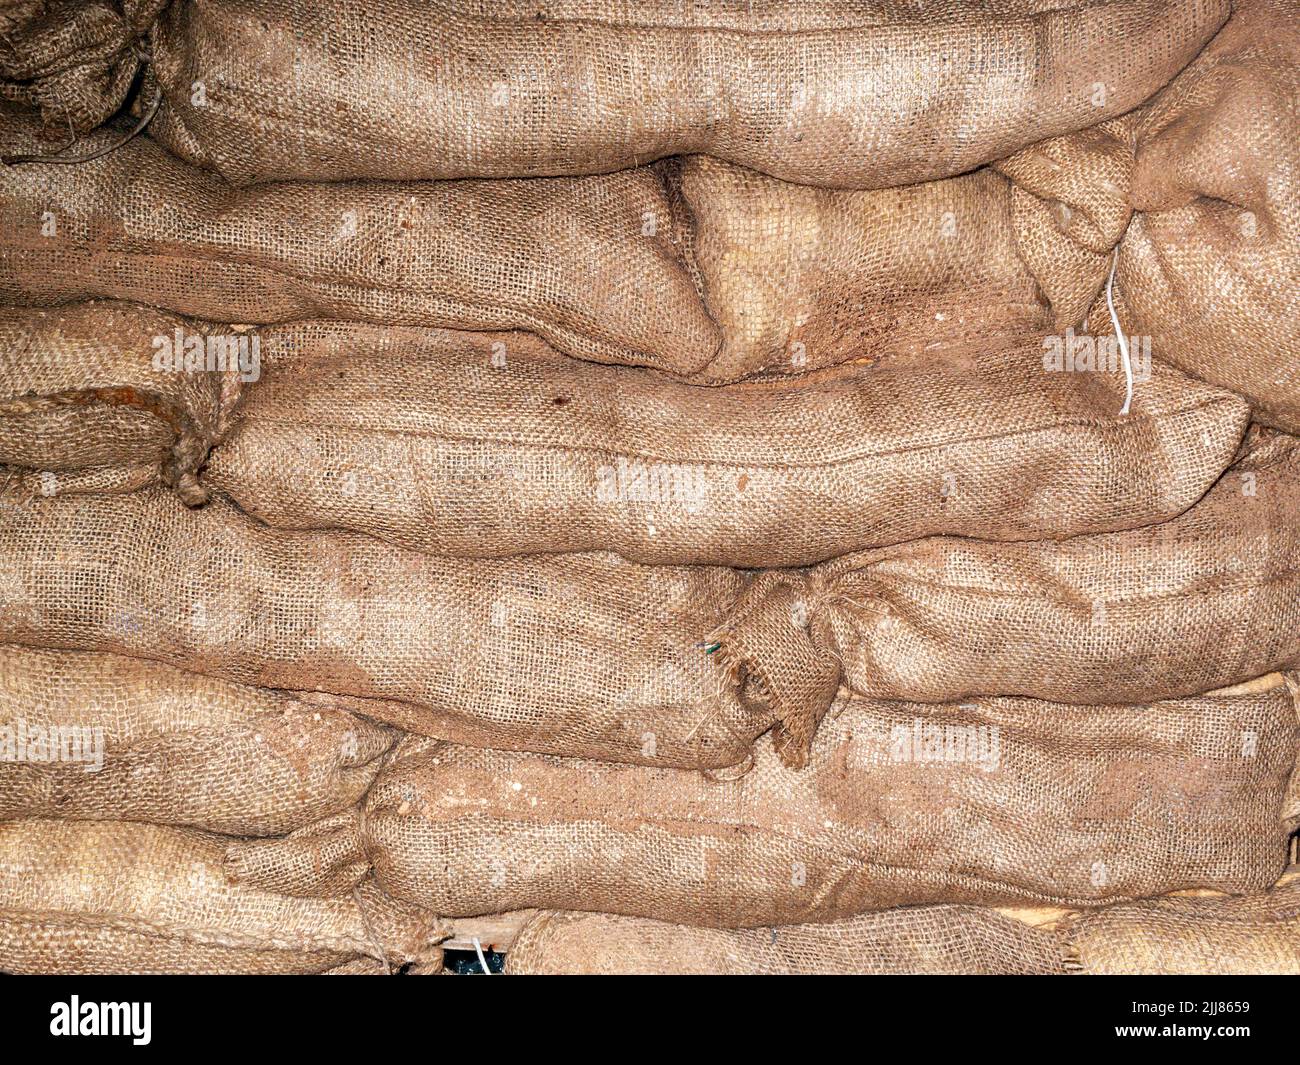 Sandbags background stacked in a heap for use as flood defence or for the military as a barricade, stock photo image Stock Photo